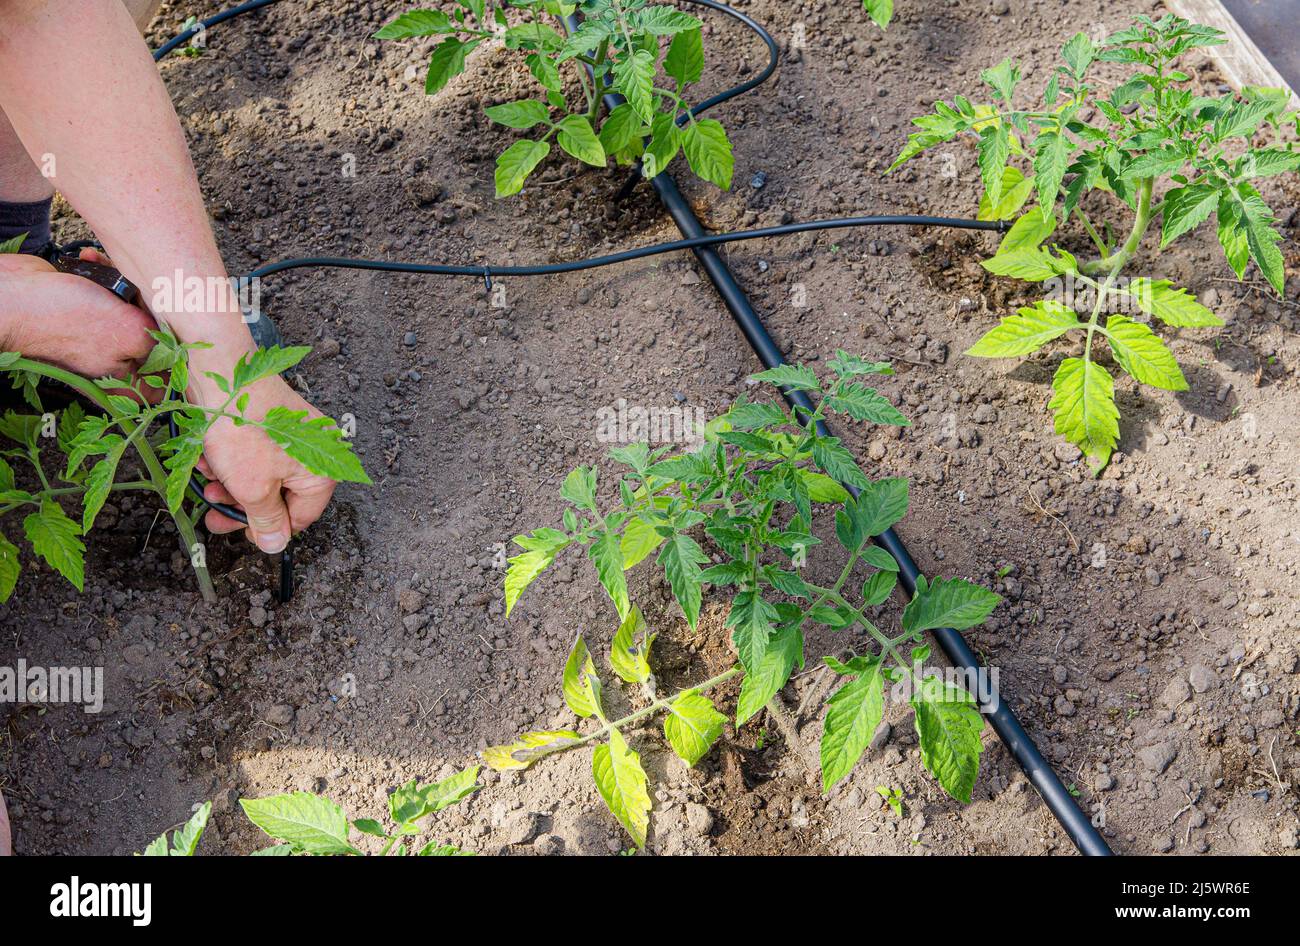 Gardener installing water dripping irrigation system in home vegetable garden, watering tomato plants in greenhouse. Stock Photo